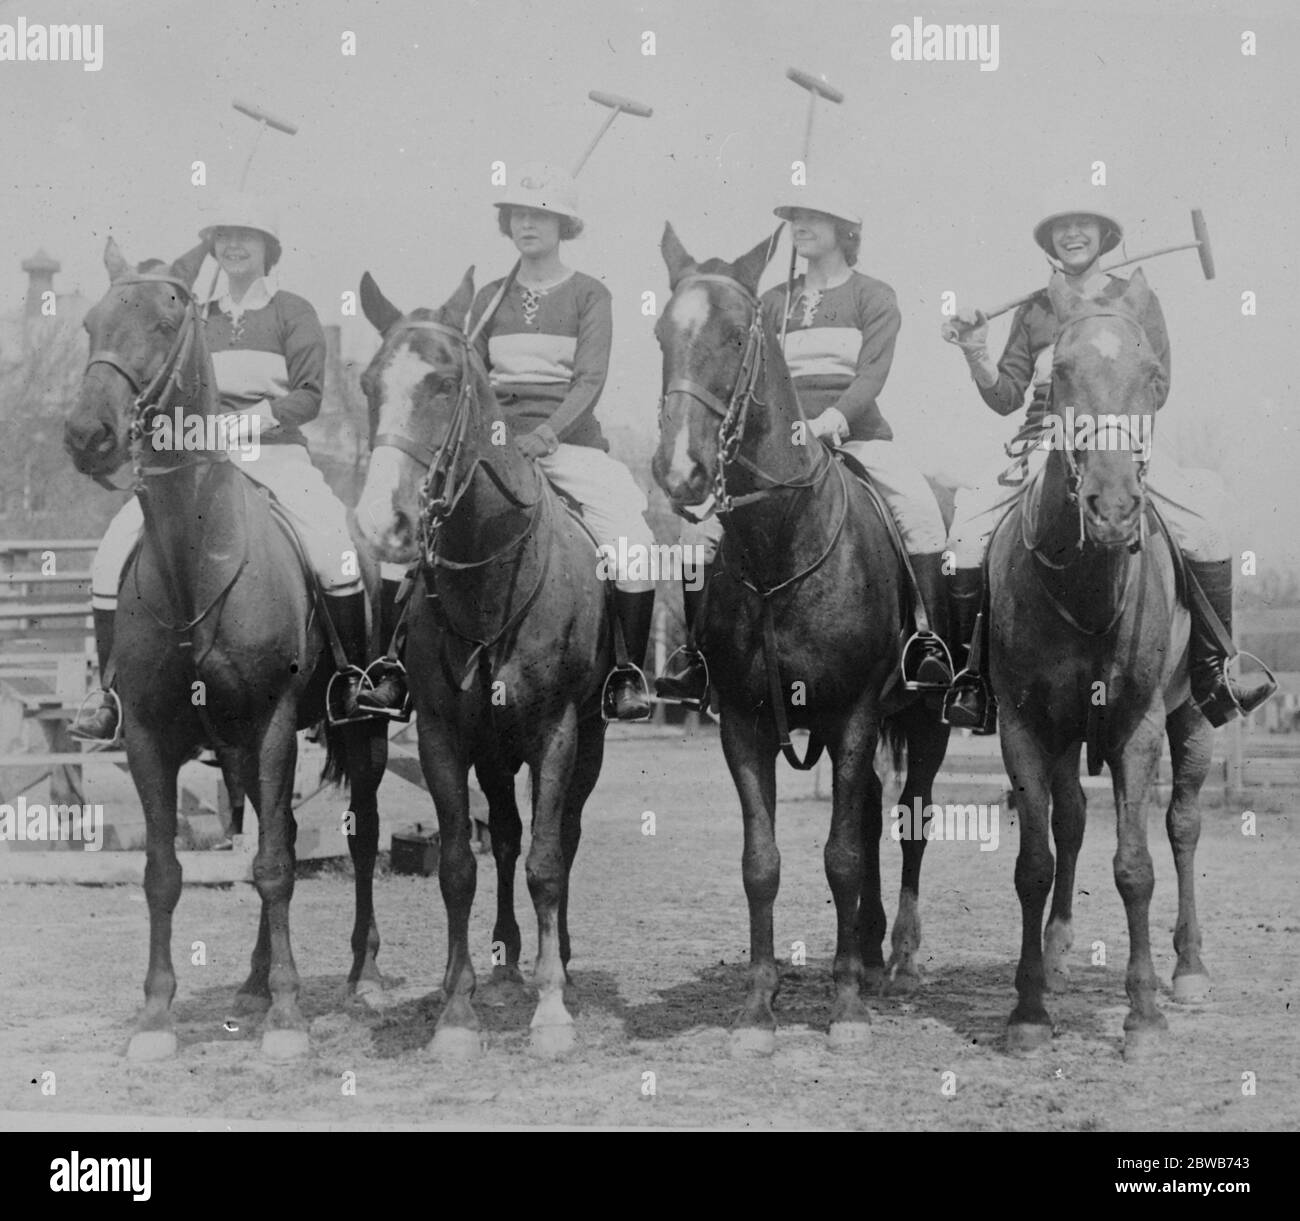 Undefeated Women ' s Polo Team . The American women ' s polo team of Fort Myer , Virginia , has gone through the current season without a defeat . The team , from left to right ; Mrs David A Taylor , Mrs H C Hine , Mrs T L Kitts and Mrs John H Irving . 29 April 1924 Stock Photo